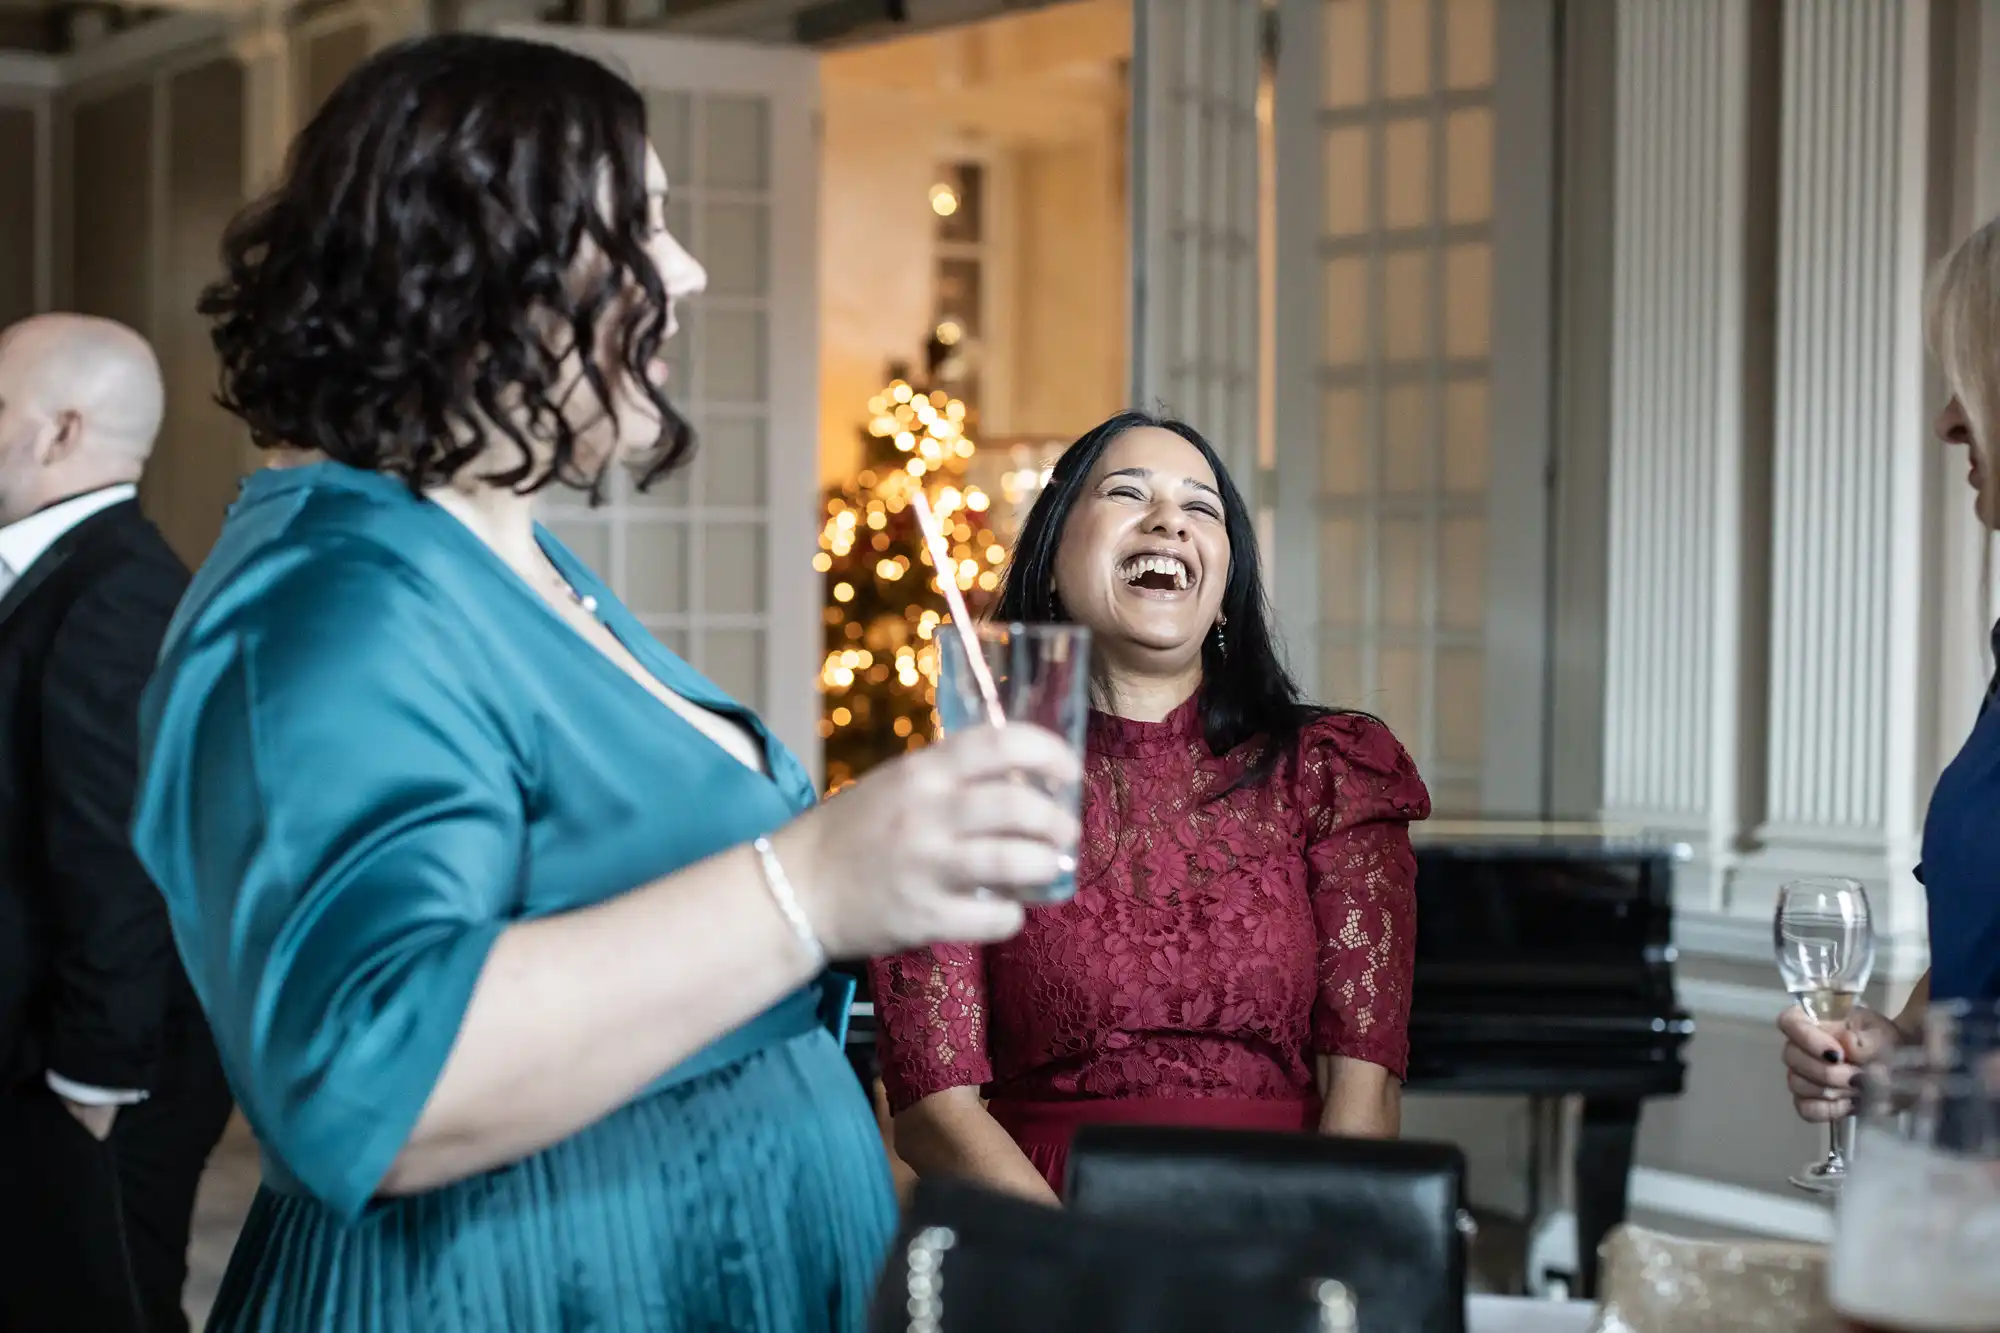 Two women are enjoying drinks and laughing together indoors, decorated with a Christmas tree in the background.